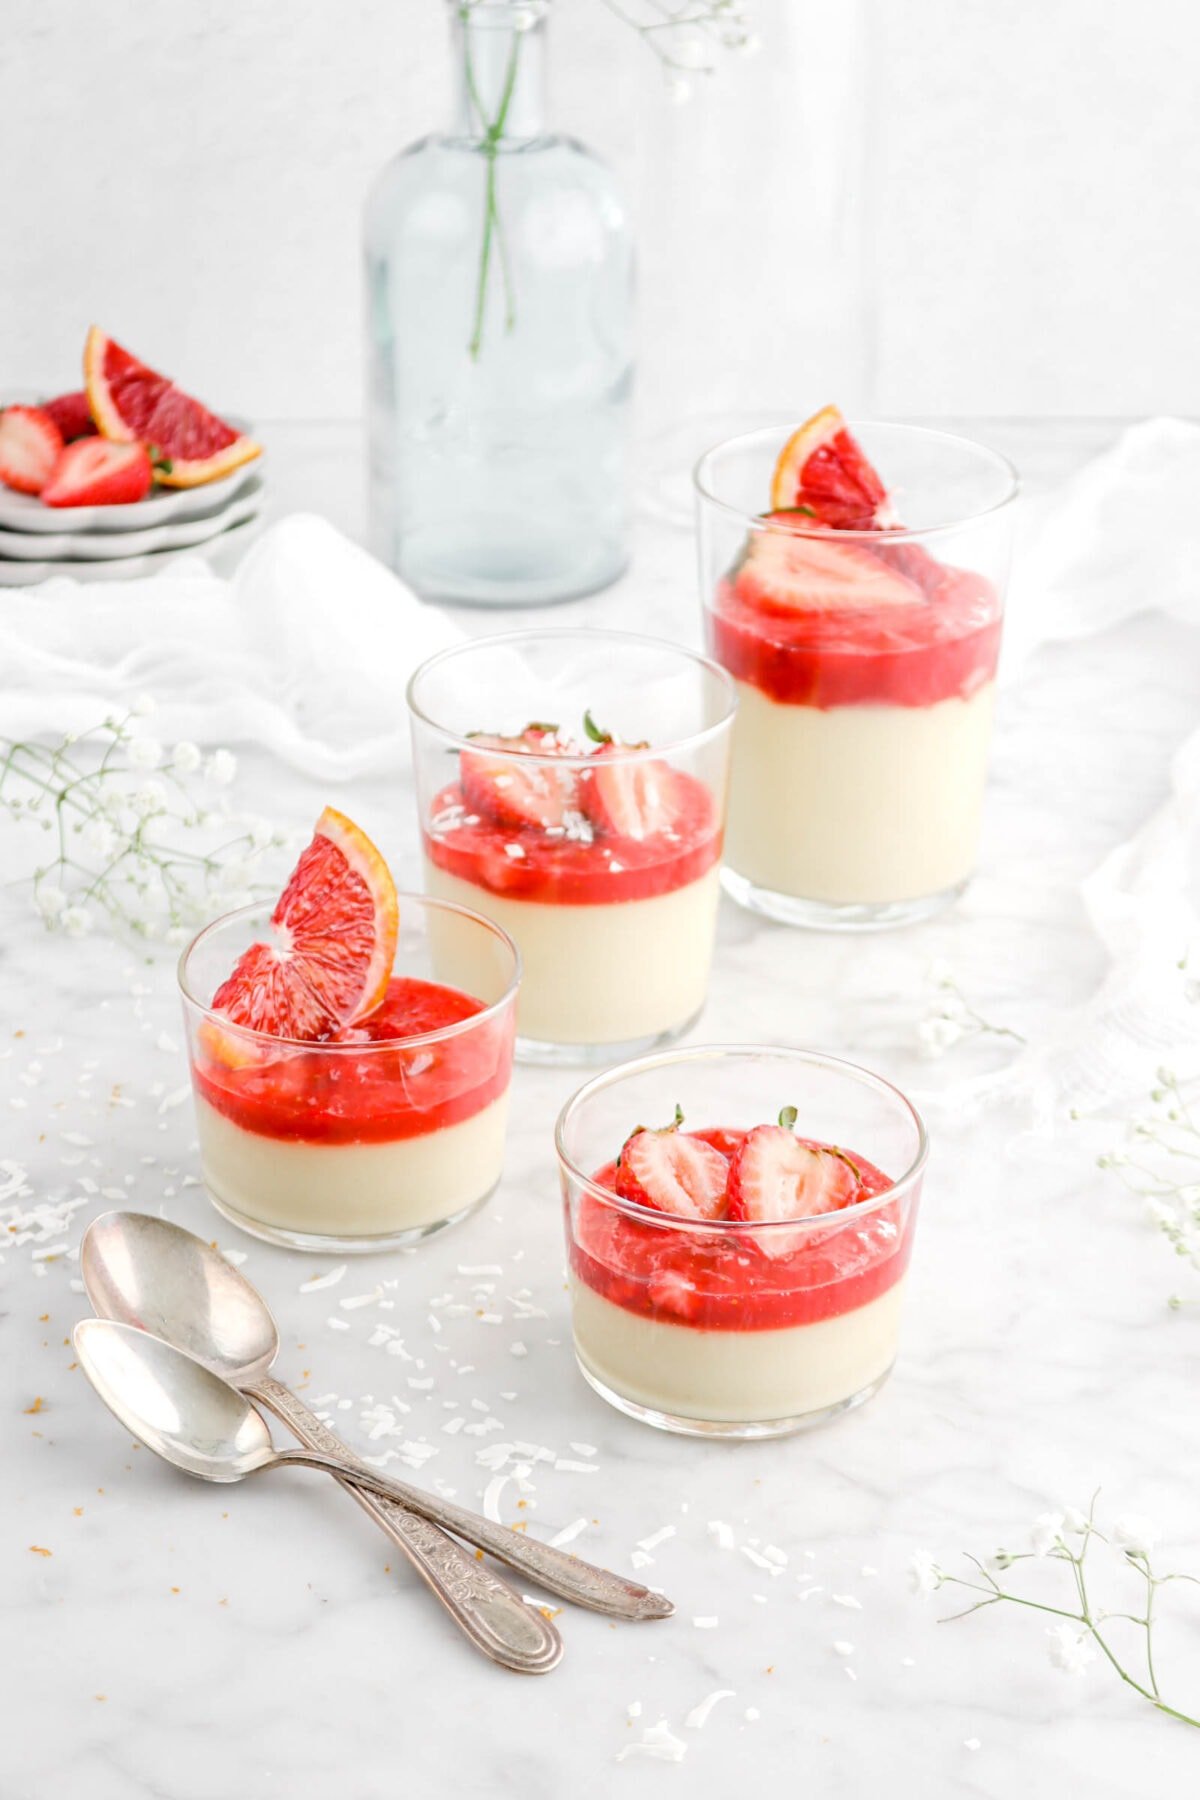 angled photo of four glasses of coconut custard with compote, sliced strawberries, and blood orange slices on top with coconut flakes and two spoons beside